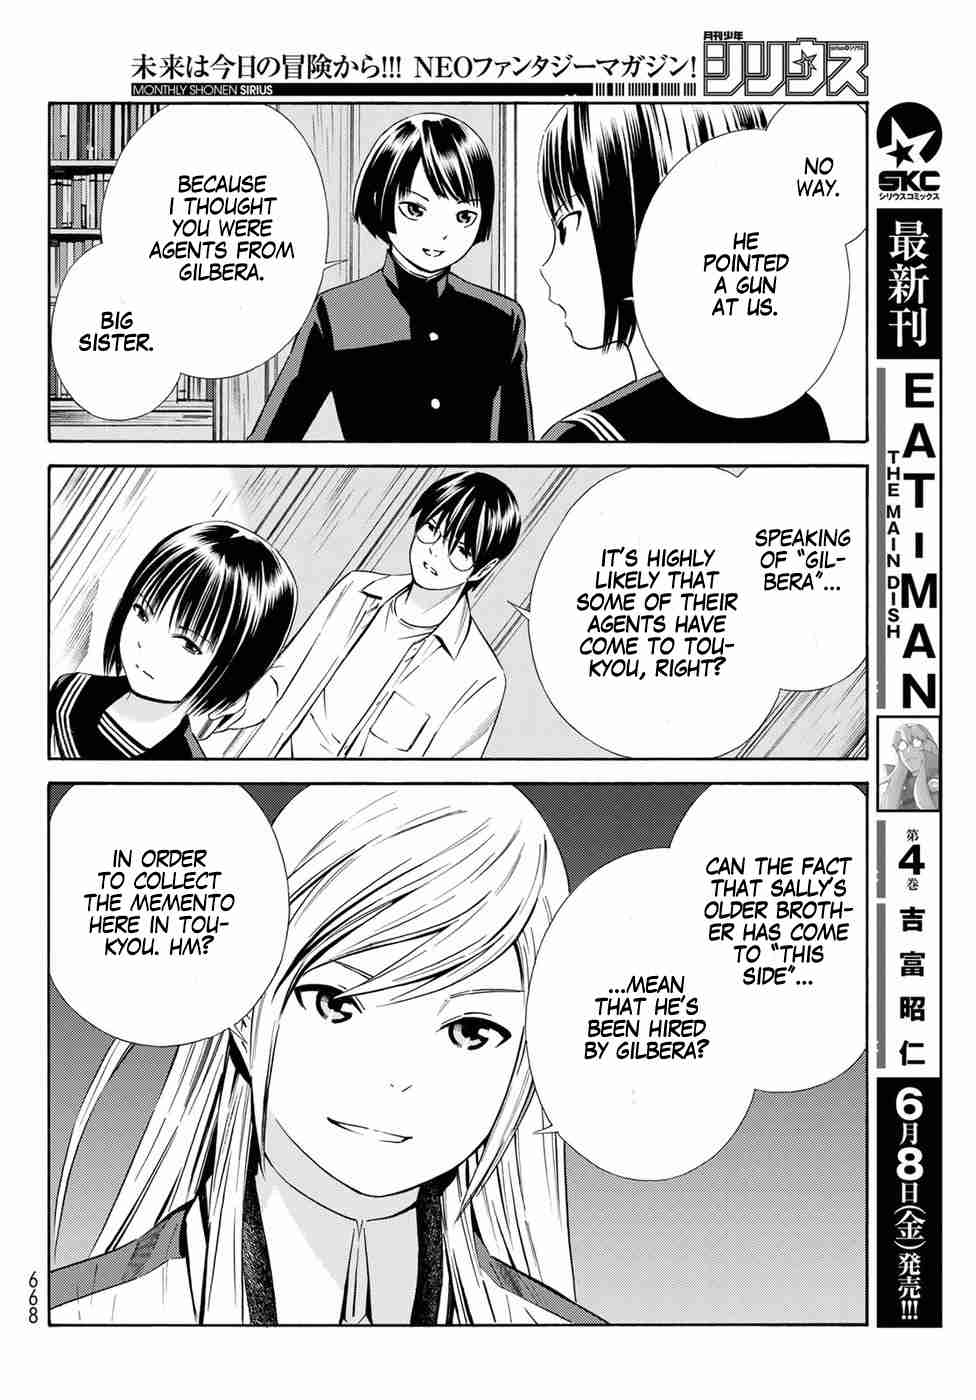 Eat Man The Main Dish Vol. 4 Ch. 20 The Friend in the Parallel world